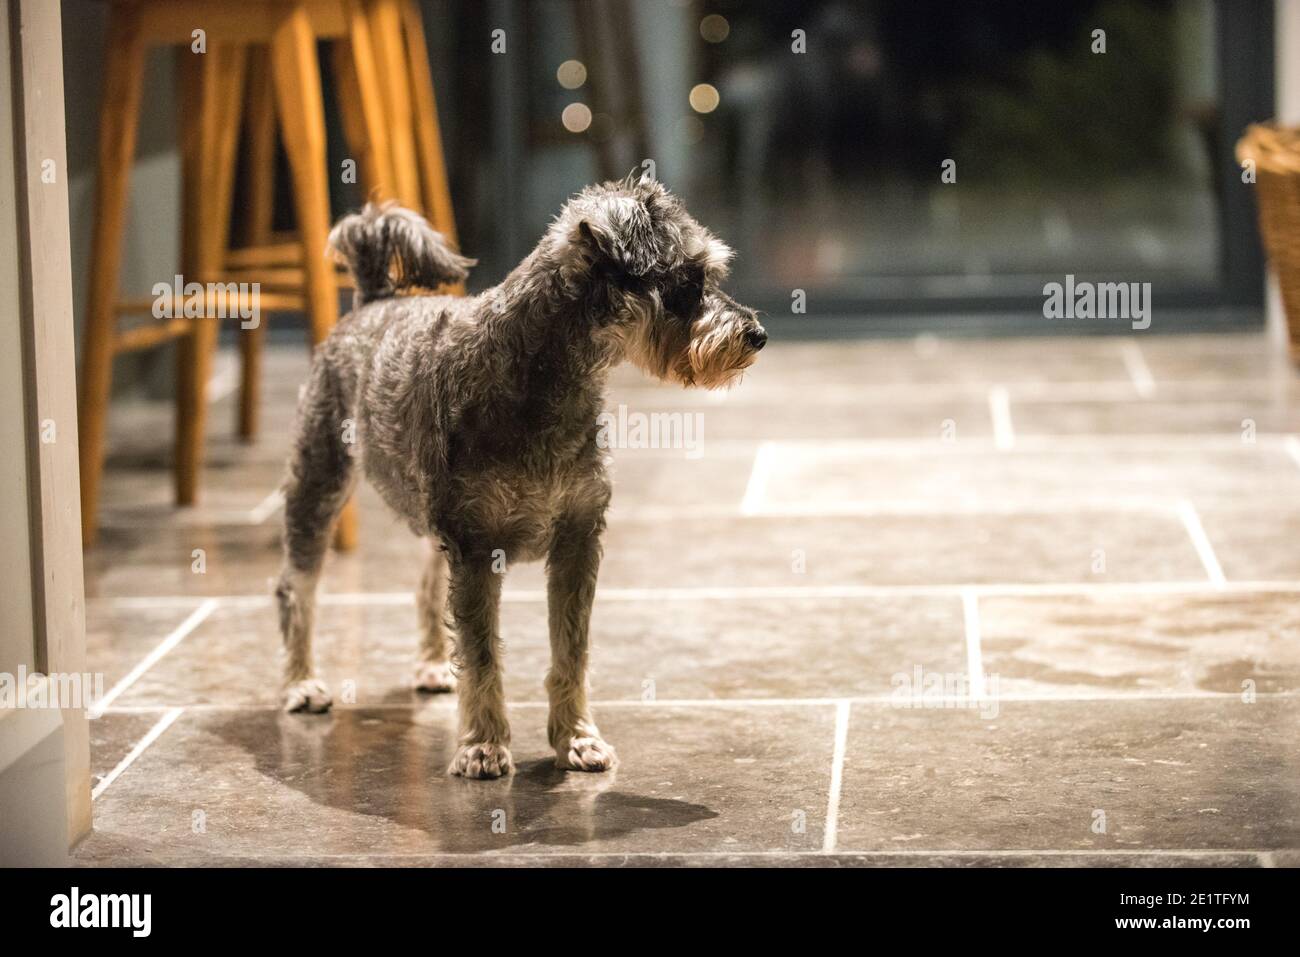 Lockdown dogs. A miniature schnauzer standing on a stone kitchen floor by an island looks directly at the camera while the owner in pyjamas walks by Stock Photo